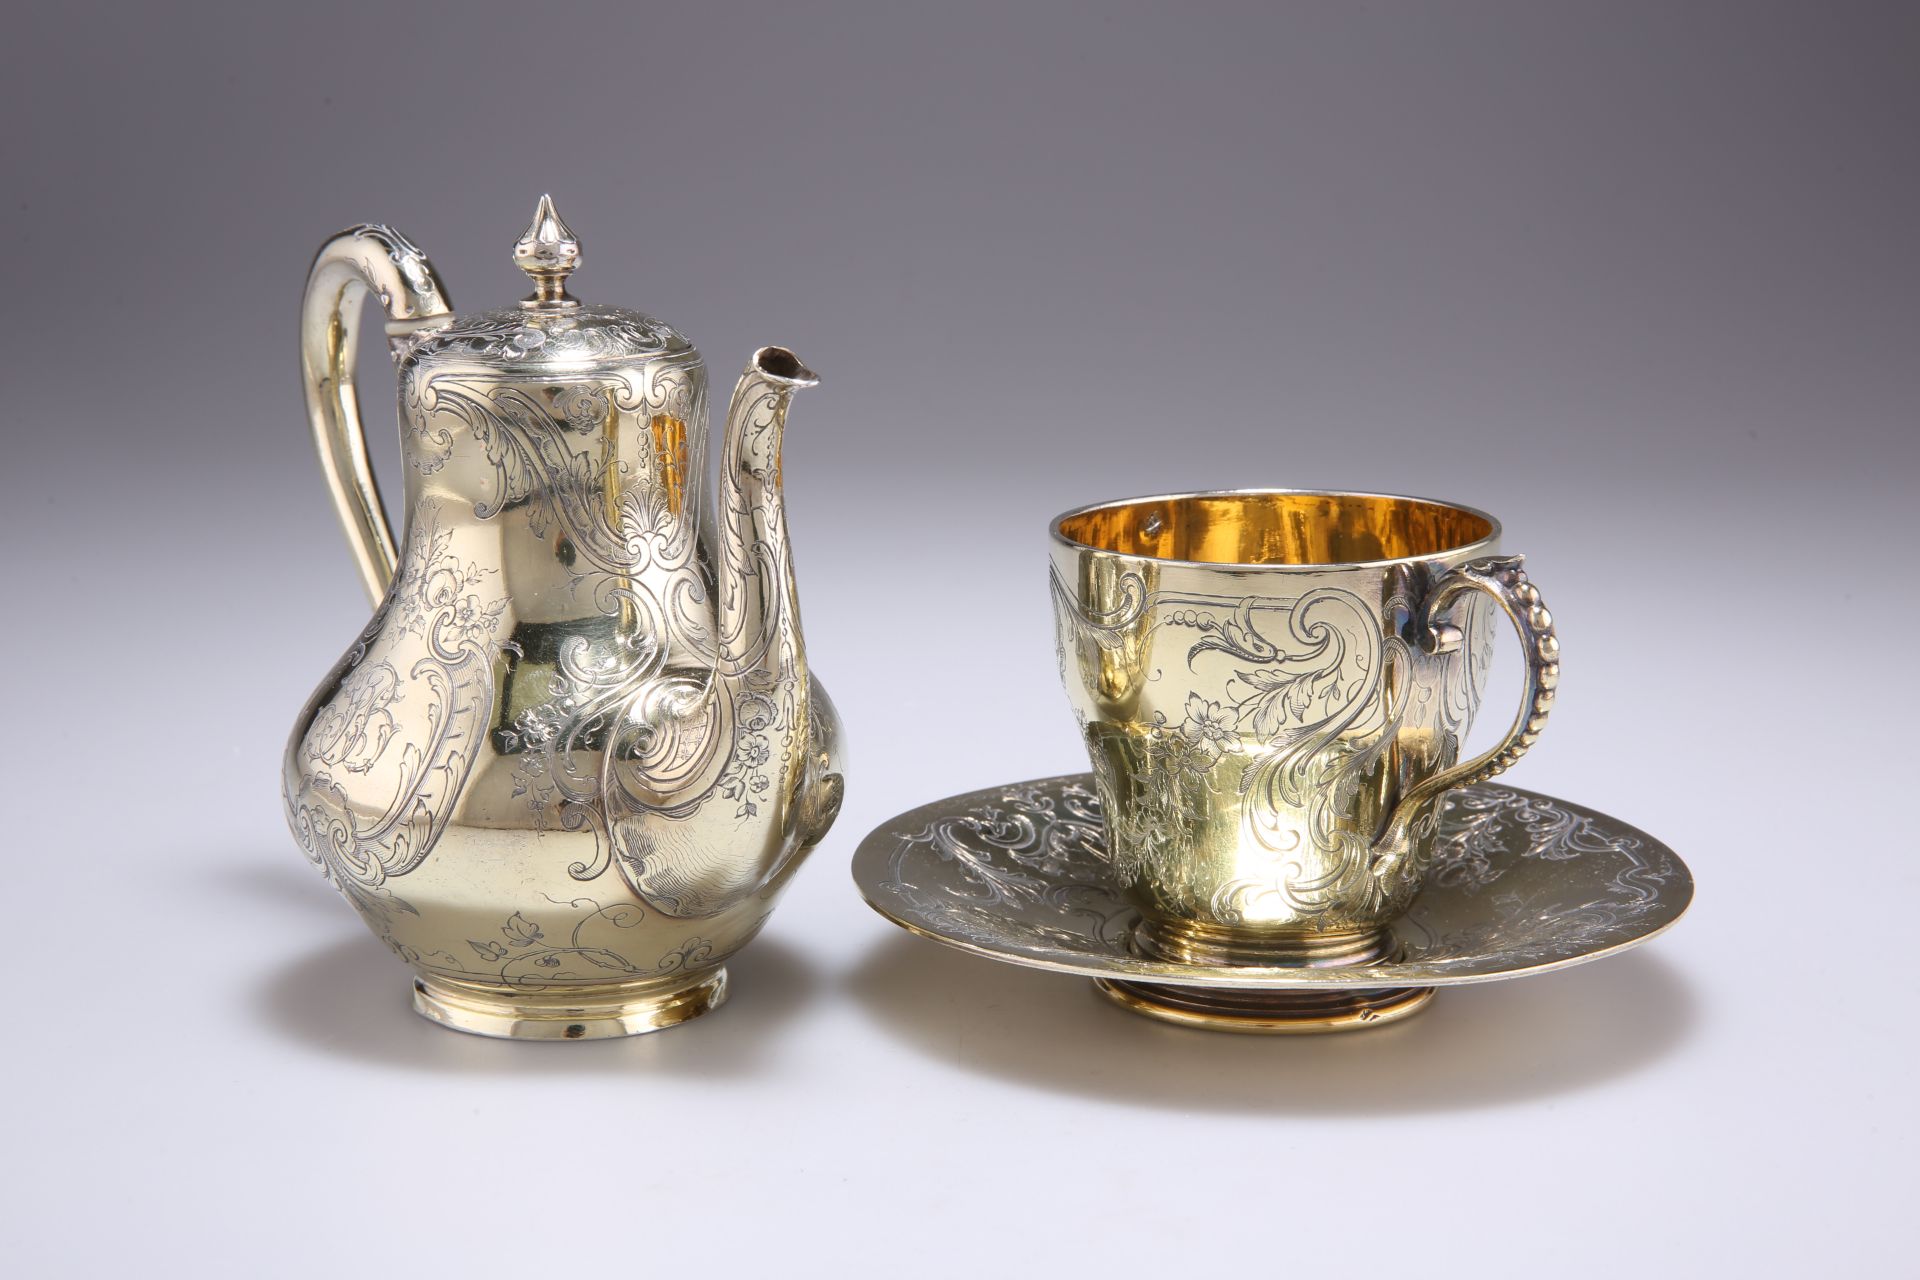 A FRENCH SILVER-GILT COFFEE POT, CUP AND SAUCER, MID 19TH CENTURY - Image 2 of 2